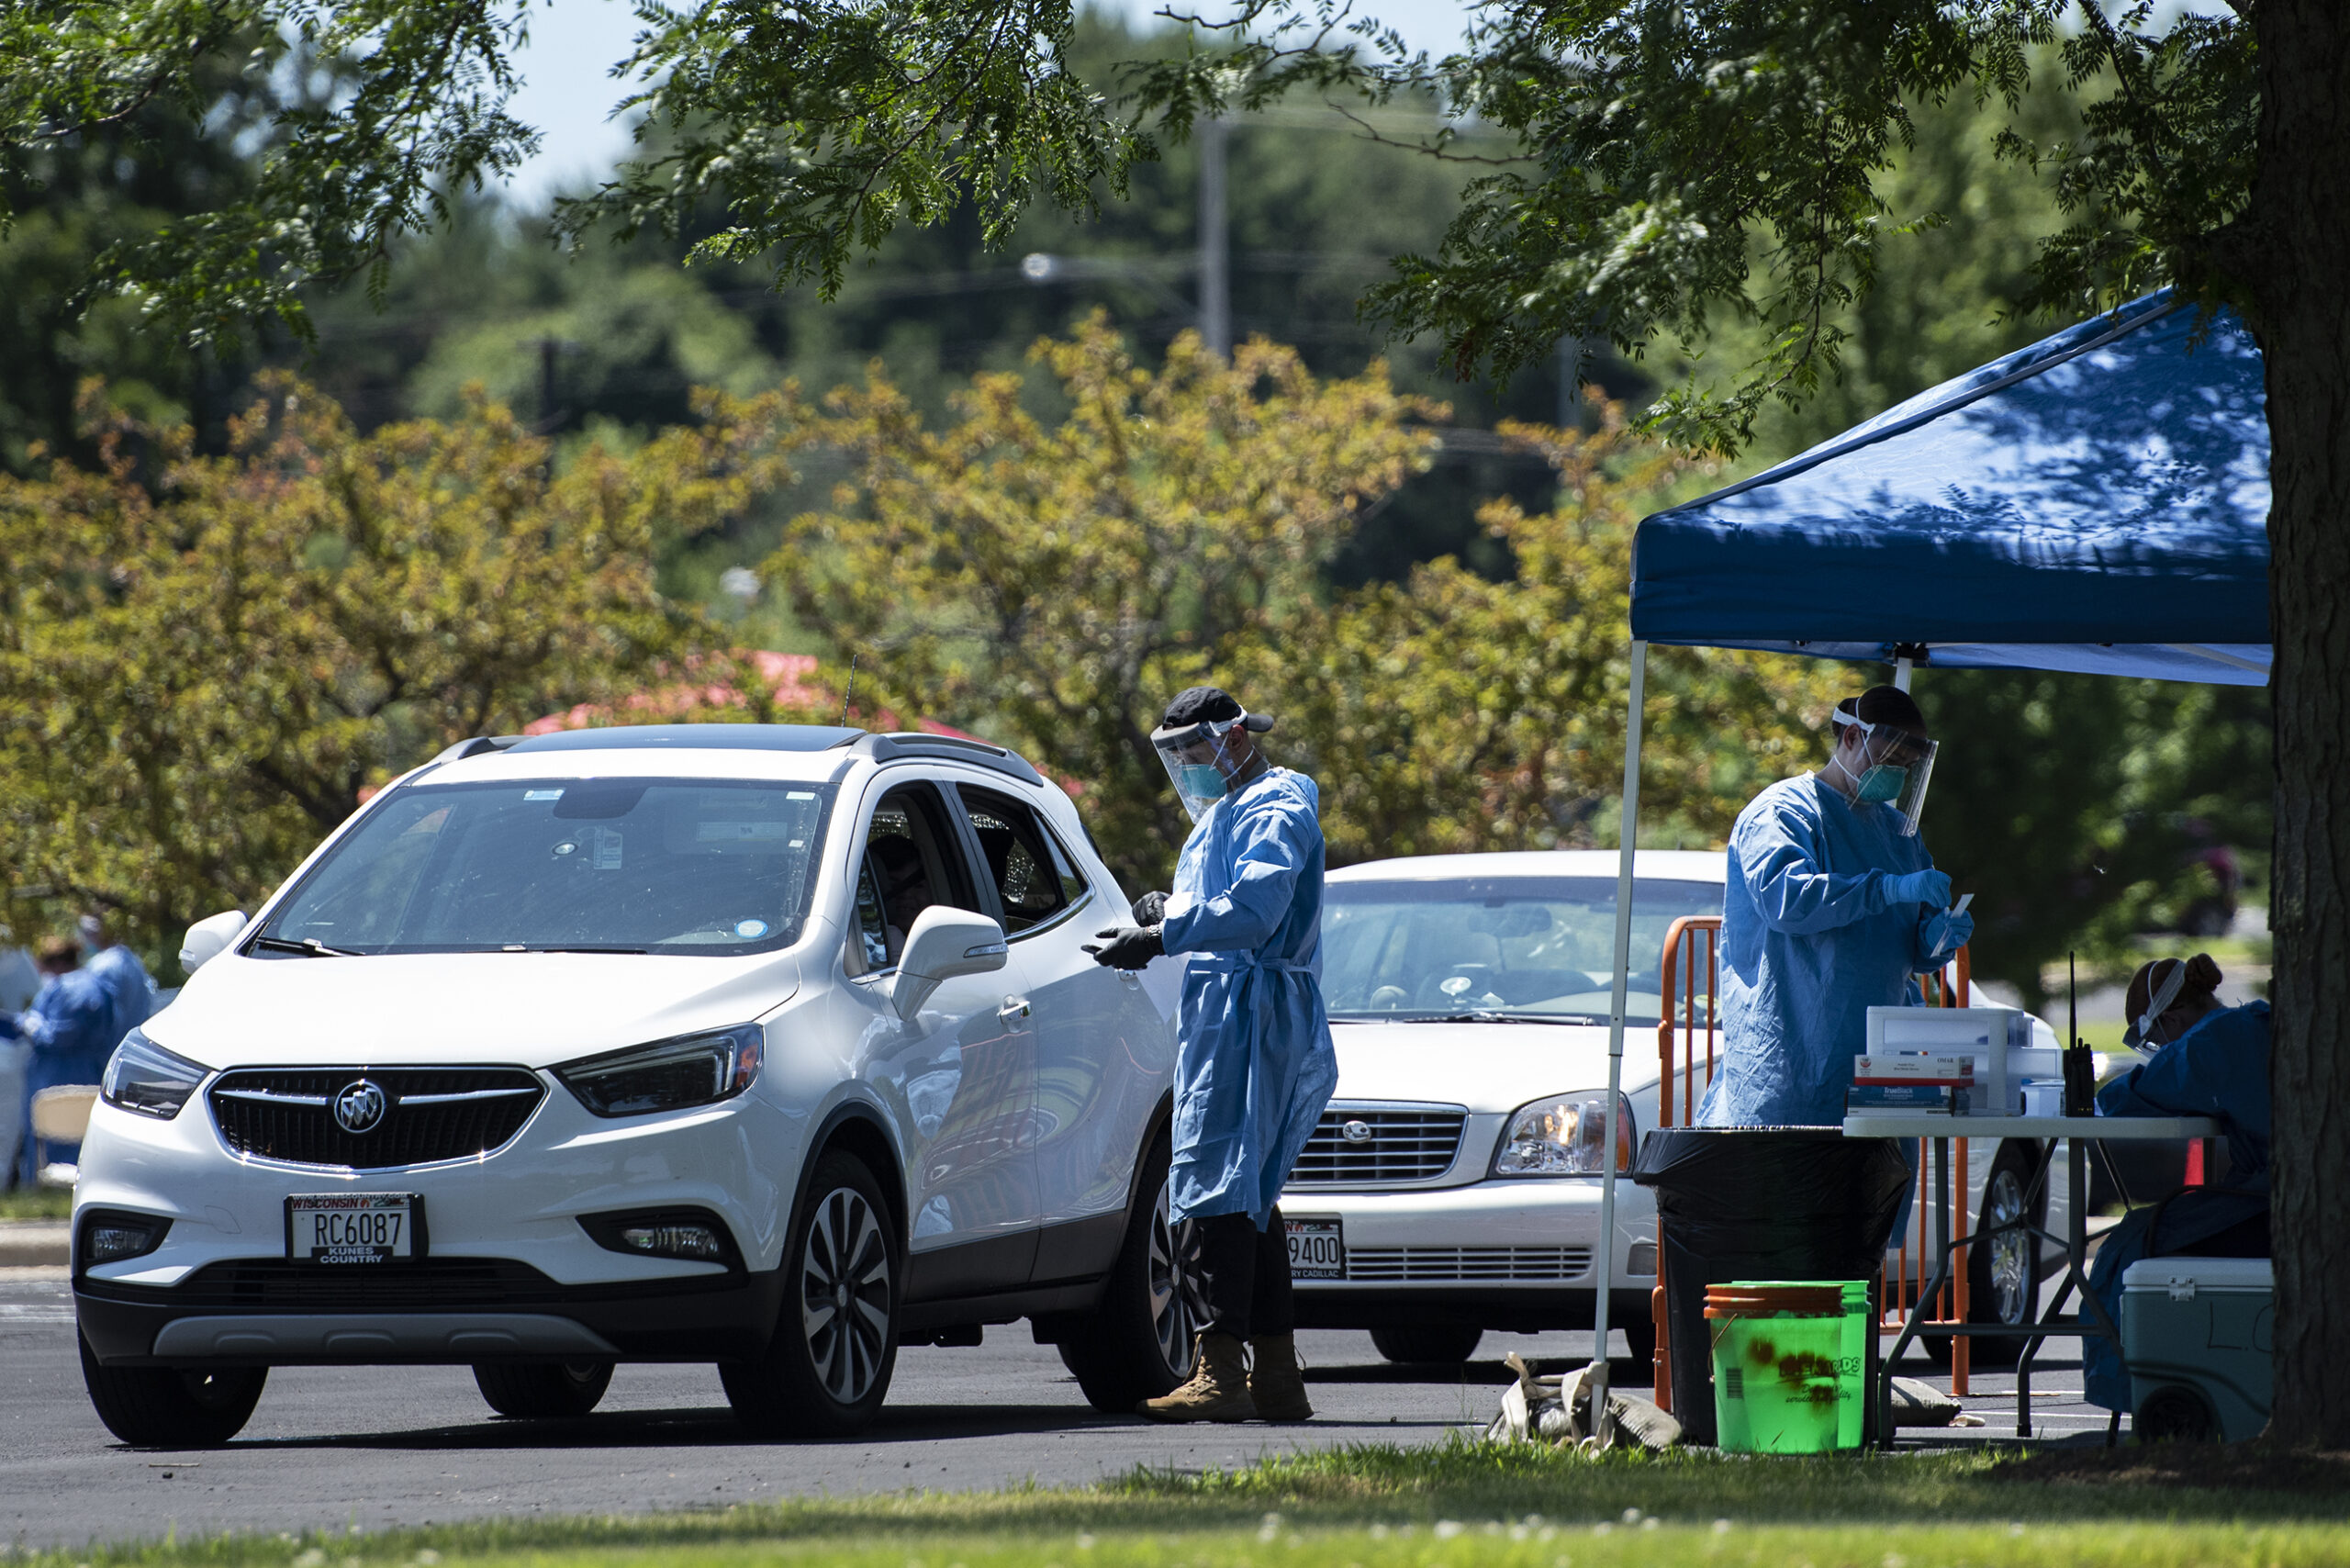 A man in a blue medical gown approaches a white SUV to administer a test